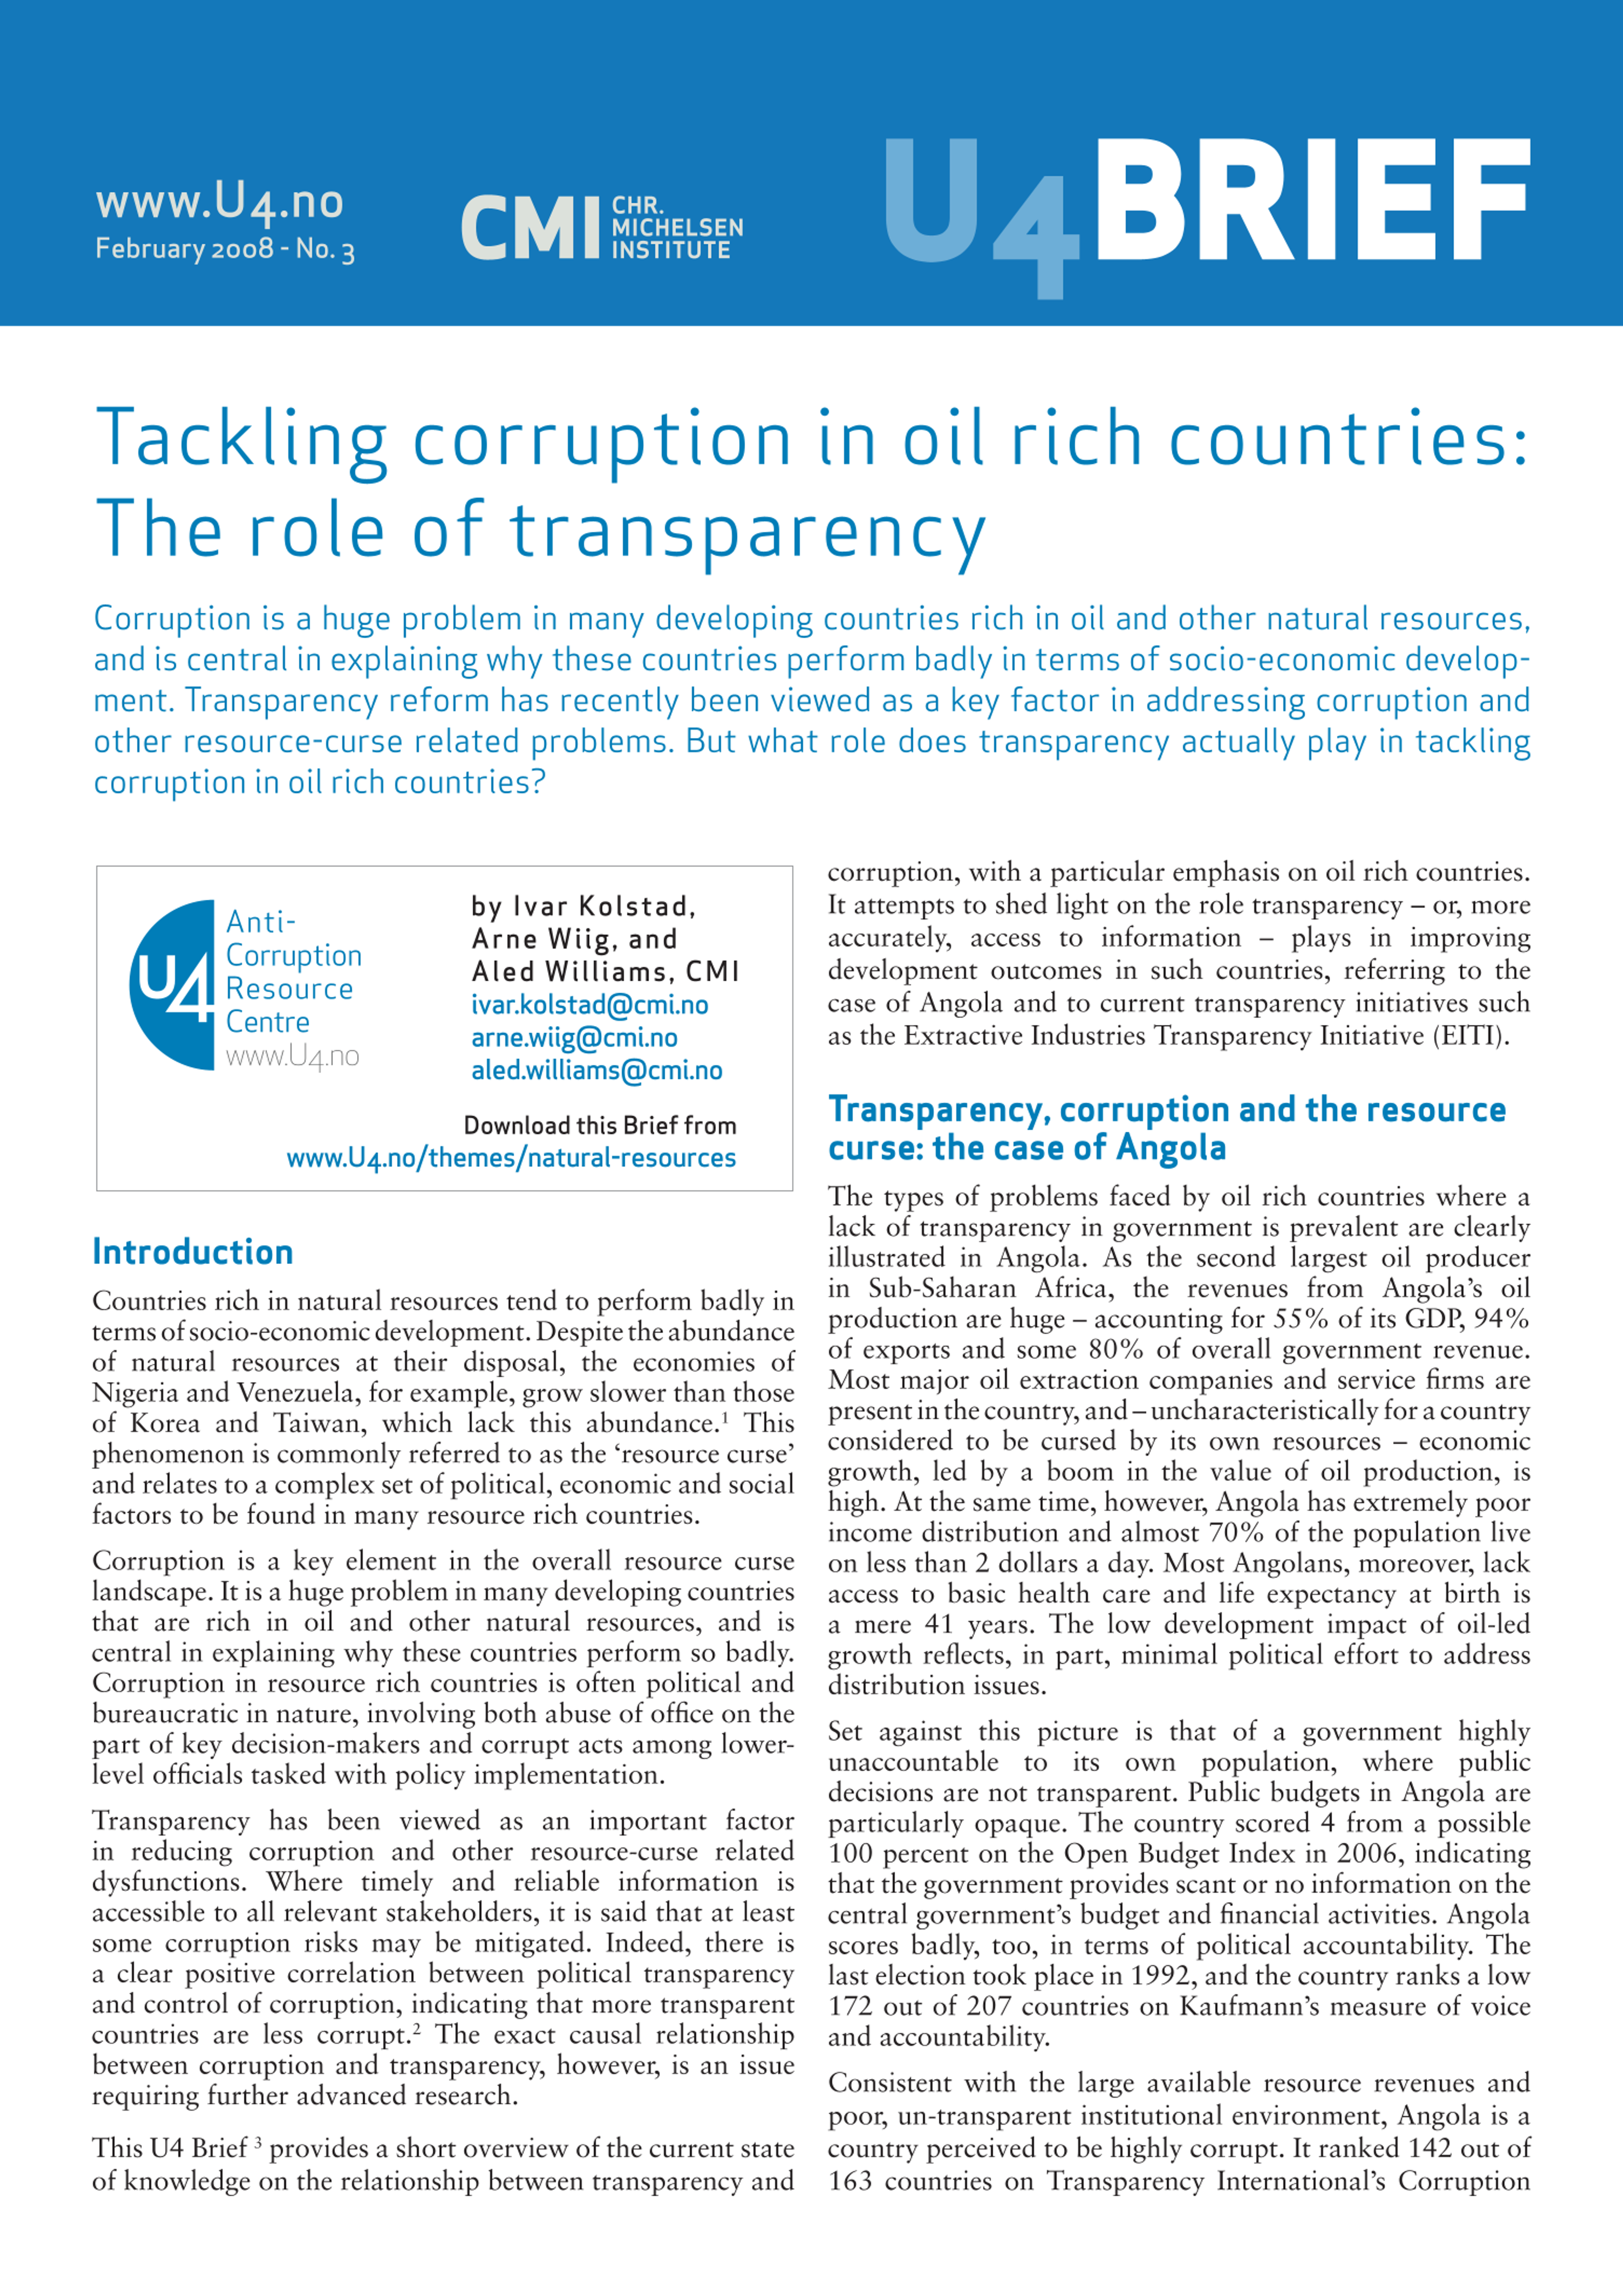 Tackling corruption in oil rich countries: The role of transparency